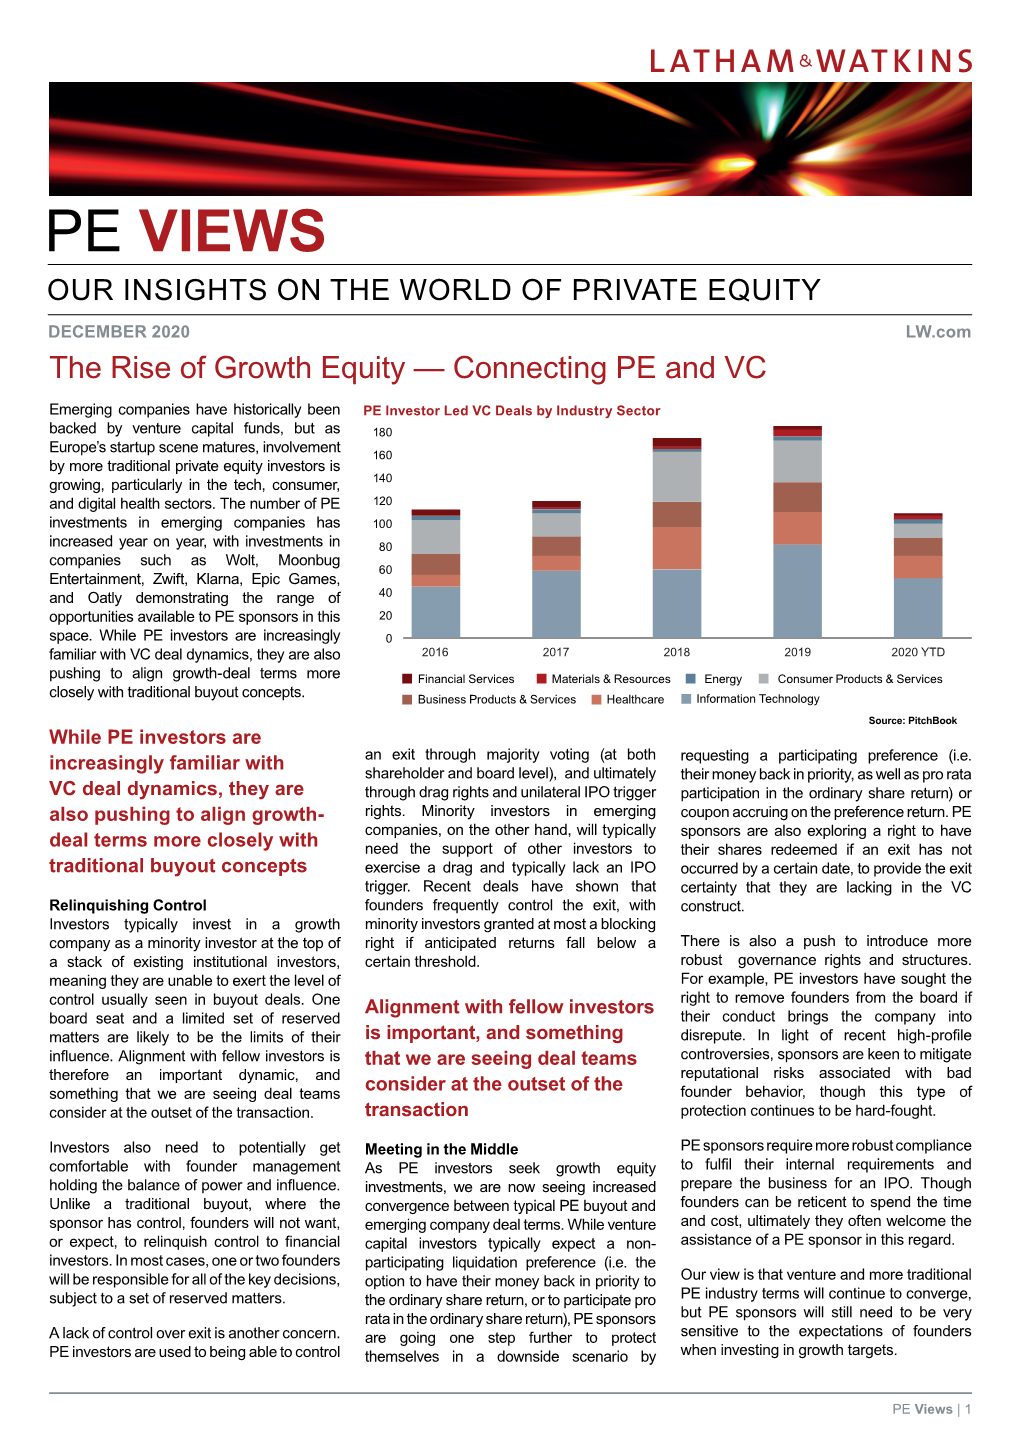 PE Views: Insights on the World of Private Equity